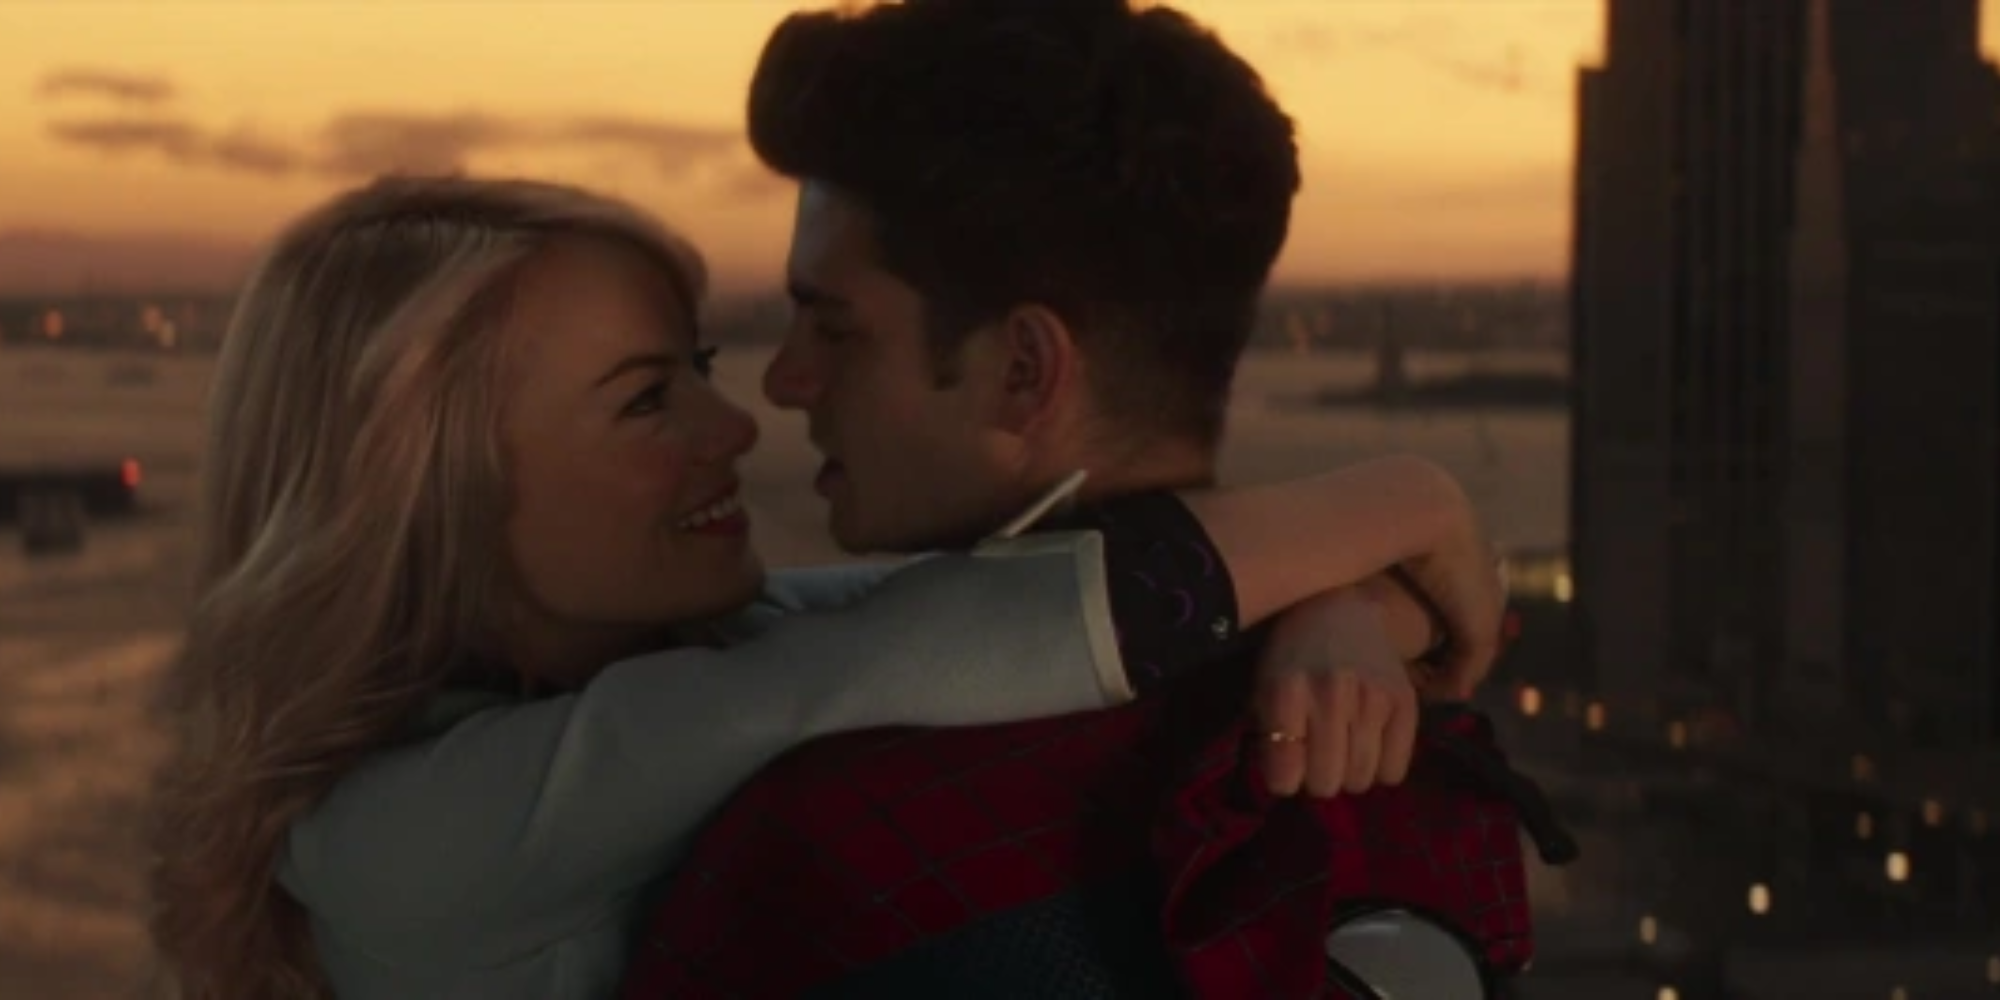 Gwen Stacy and Peter Parker embracing in The Amazing Spider-Man 2.